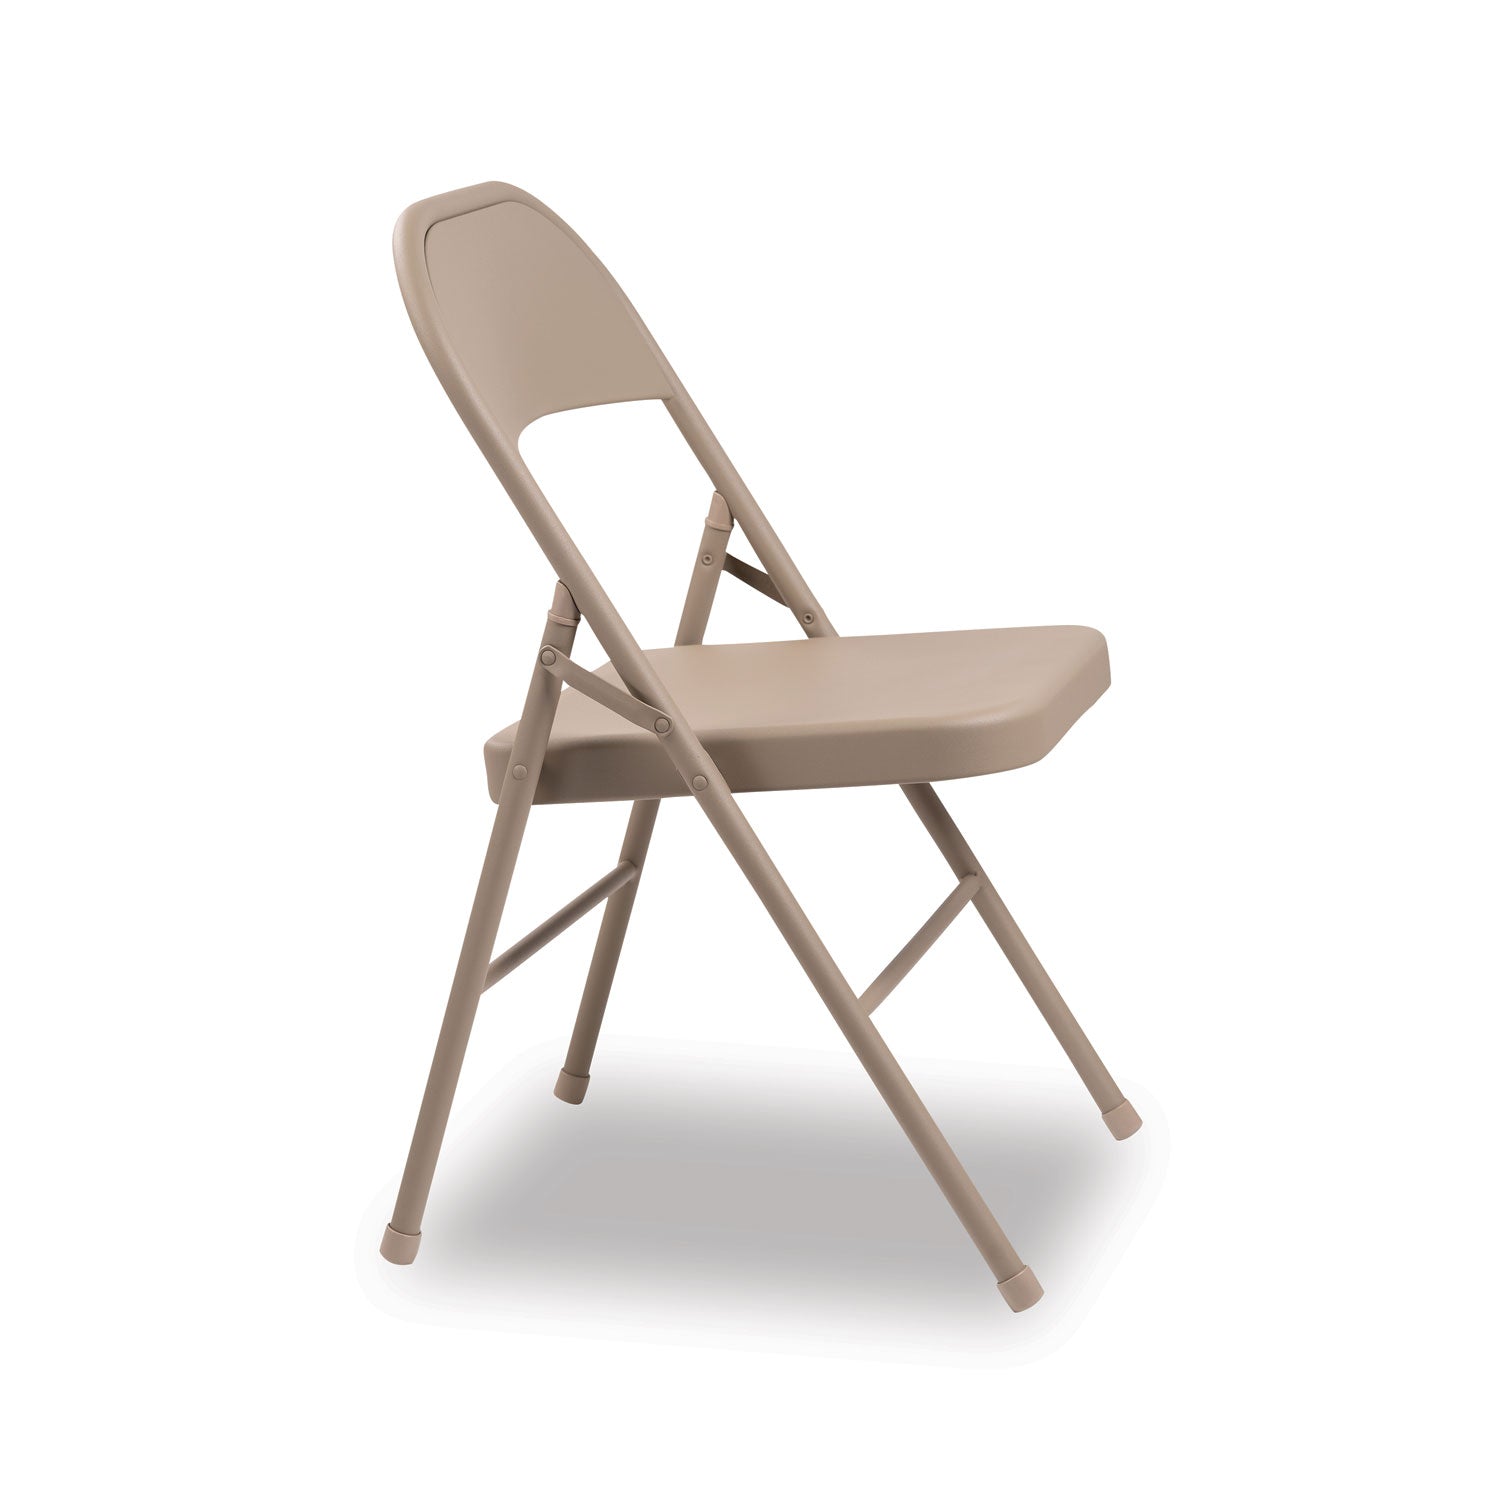 all-steel-folding-chair-supports-up-to-300-lb-165-seat-height-tan-seat-tan-back-tan-base-4-carton_alefcmt4t - 3